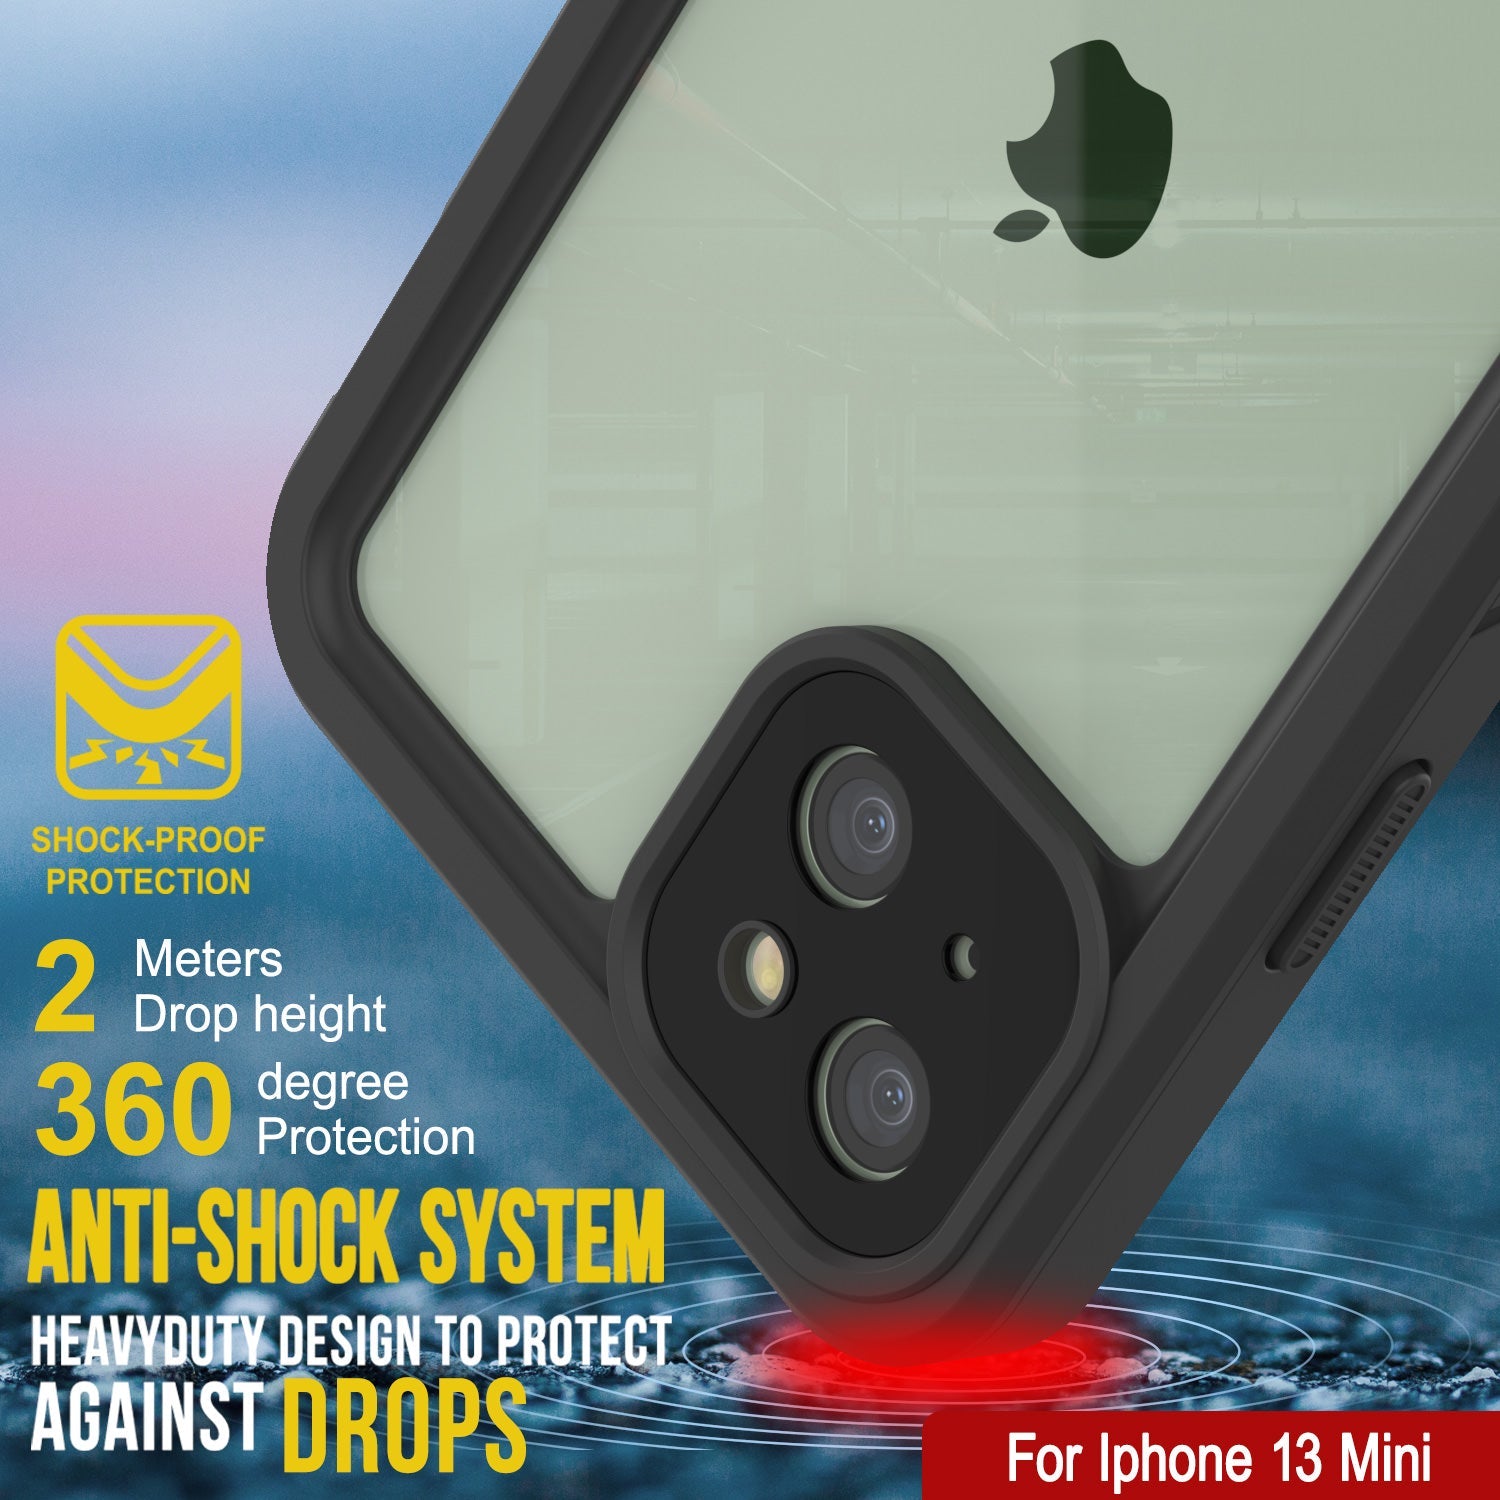 iPhone 15 Plus Waterproof Case, Punkcase [Extreme Series] Armor Cover –  punkcase